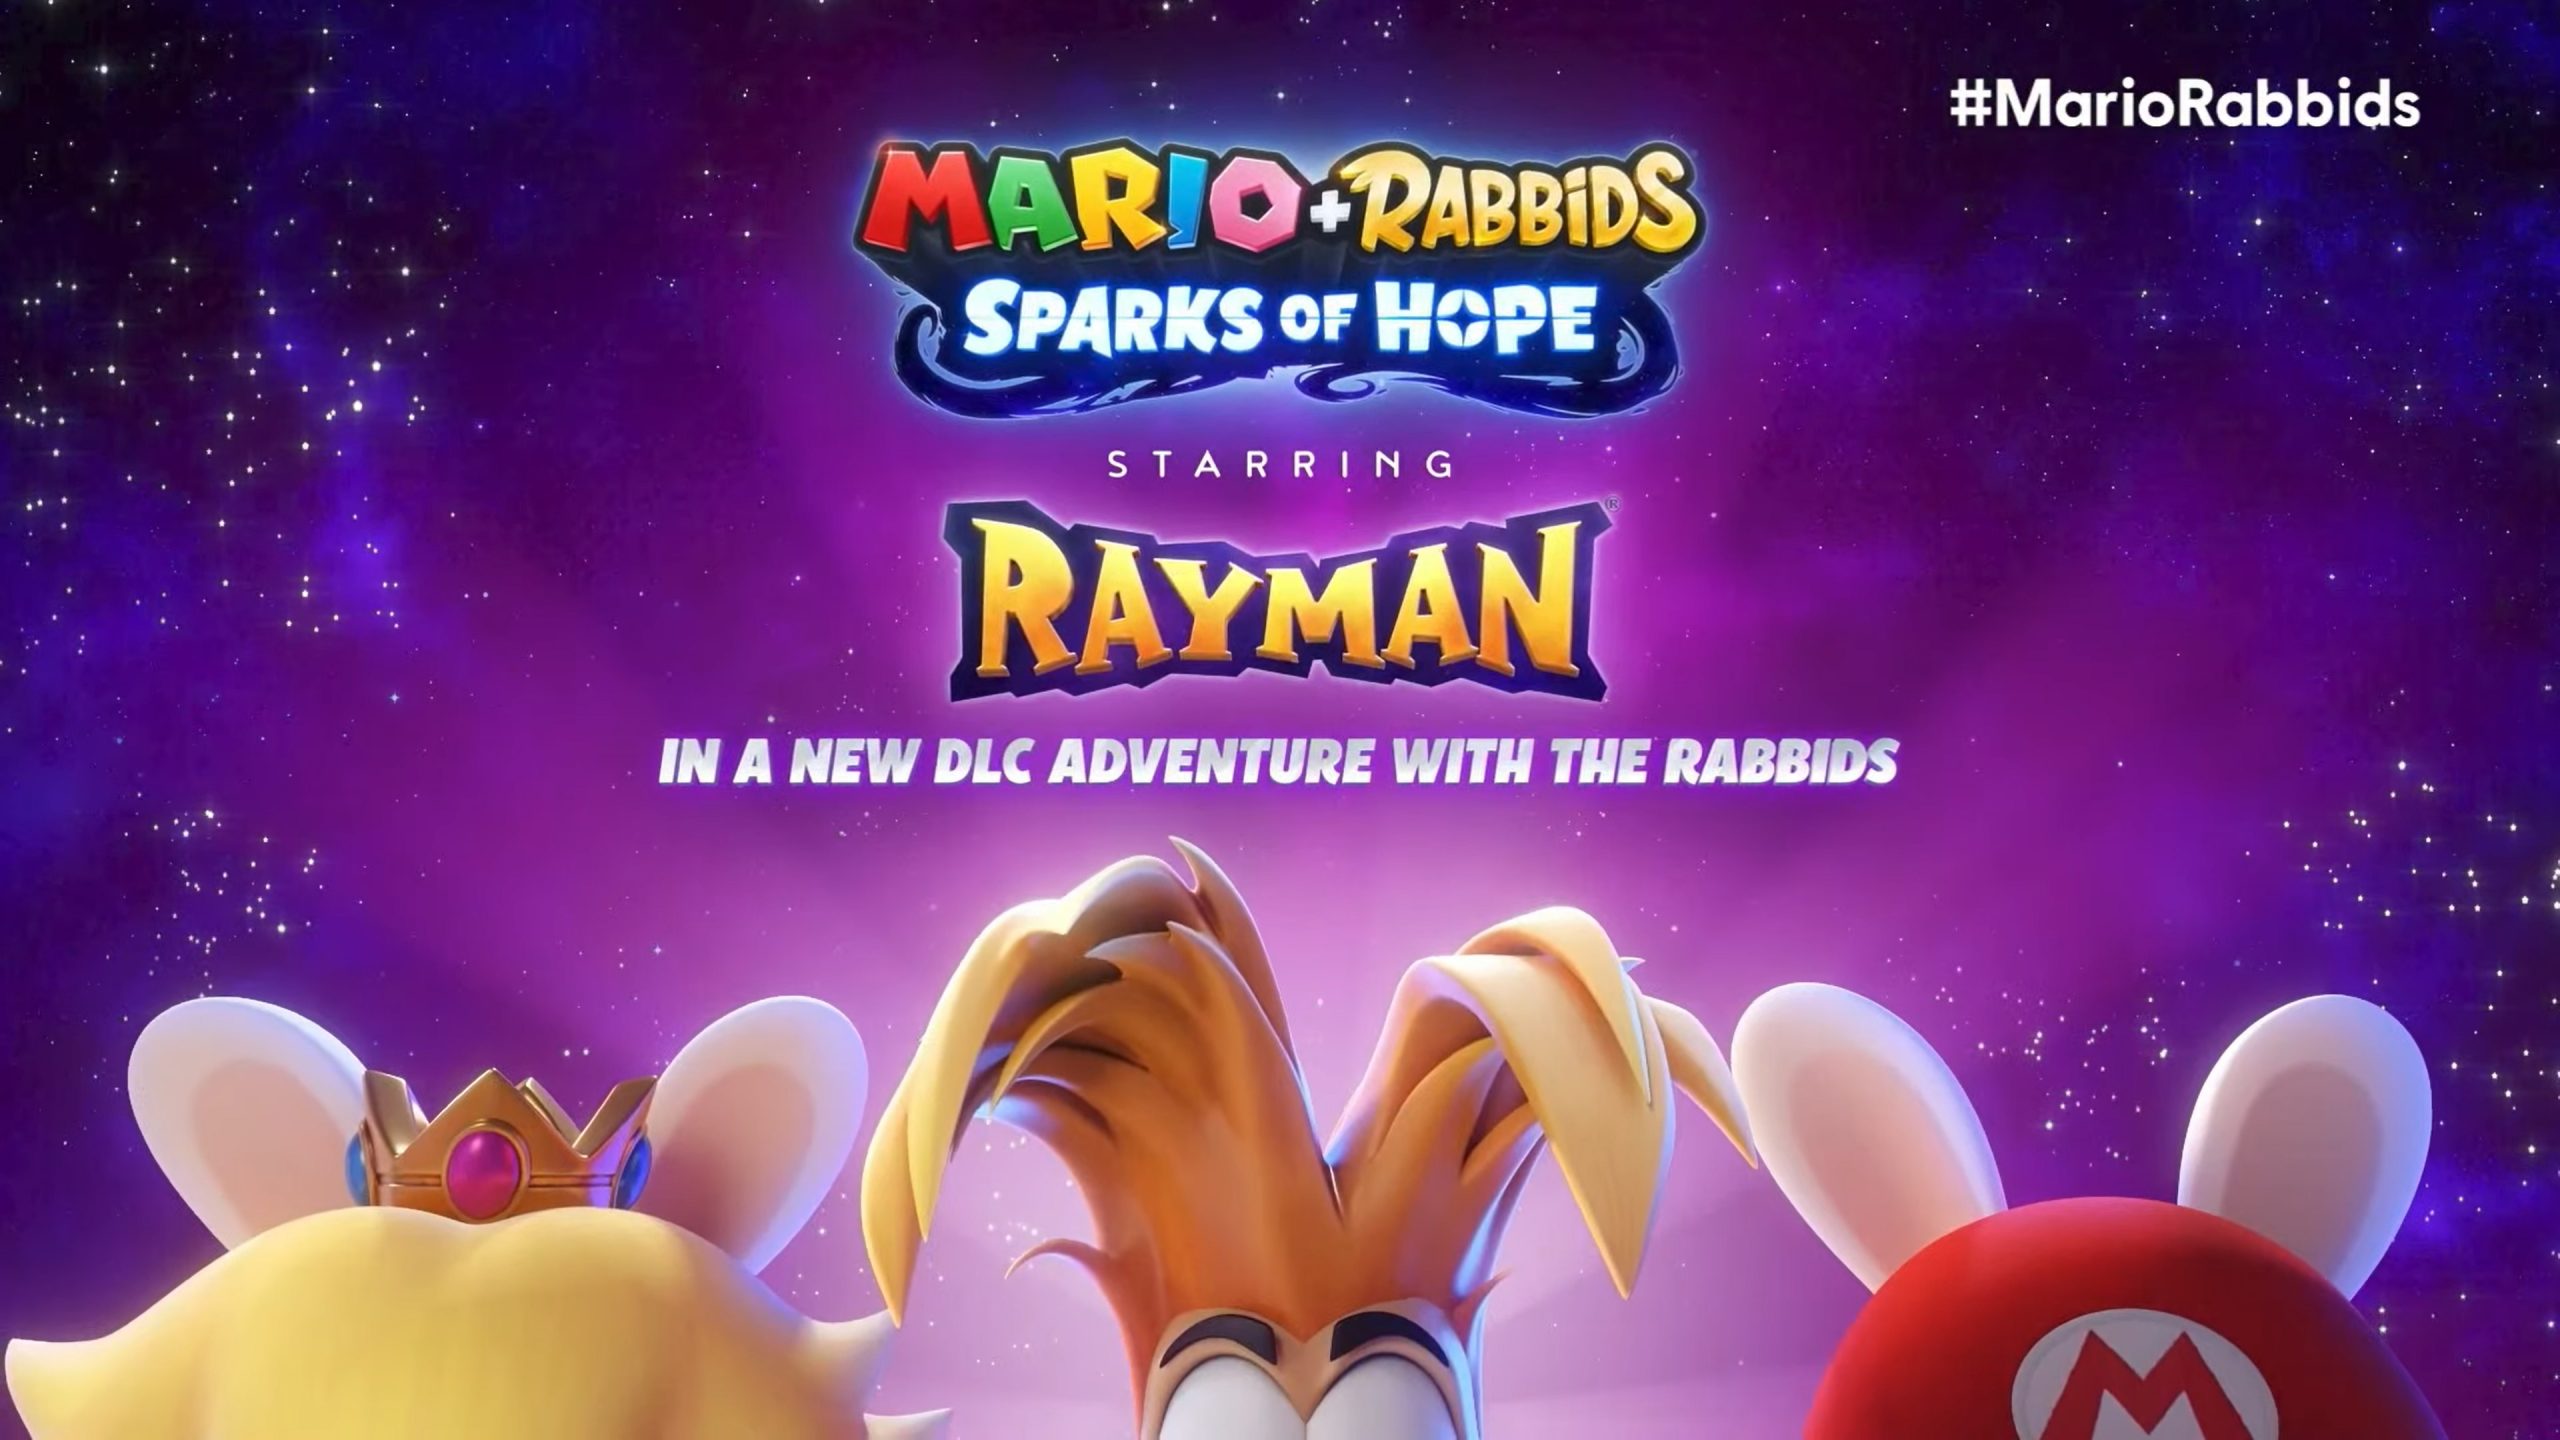 Mario + Rabbids: Sparks of Hope was my favorite Switch game of the